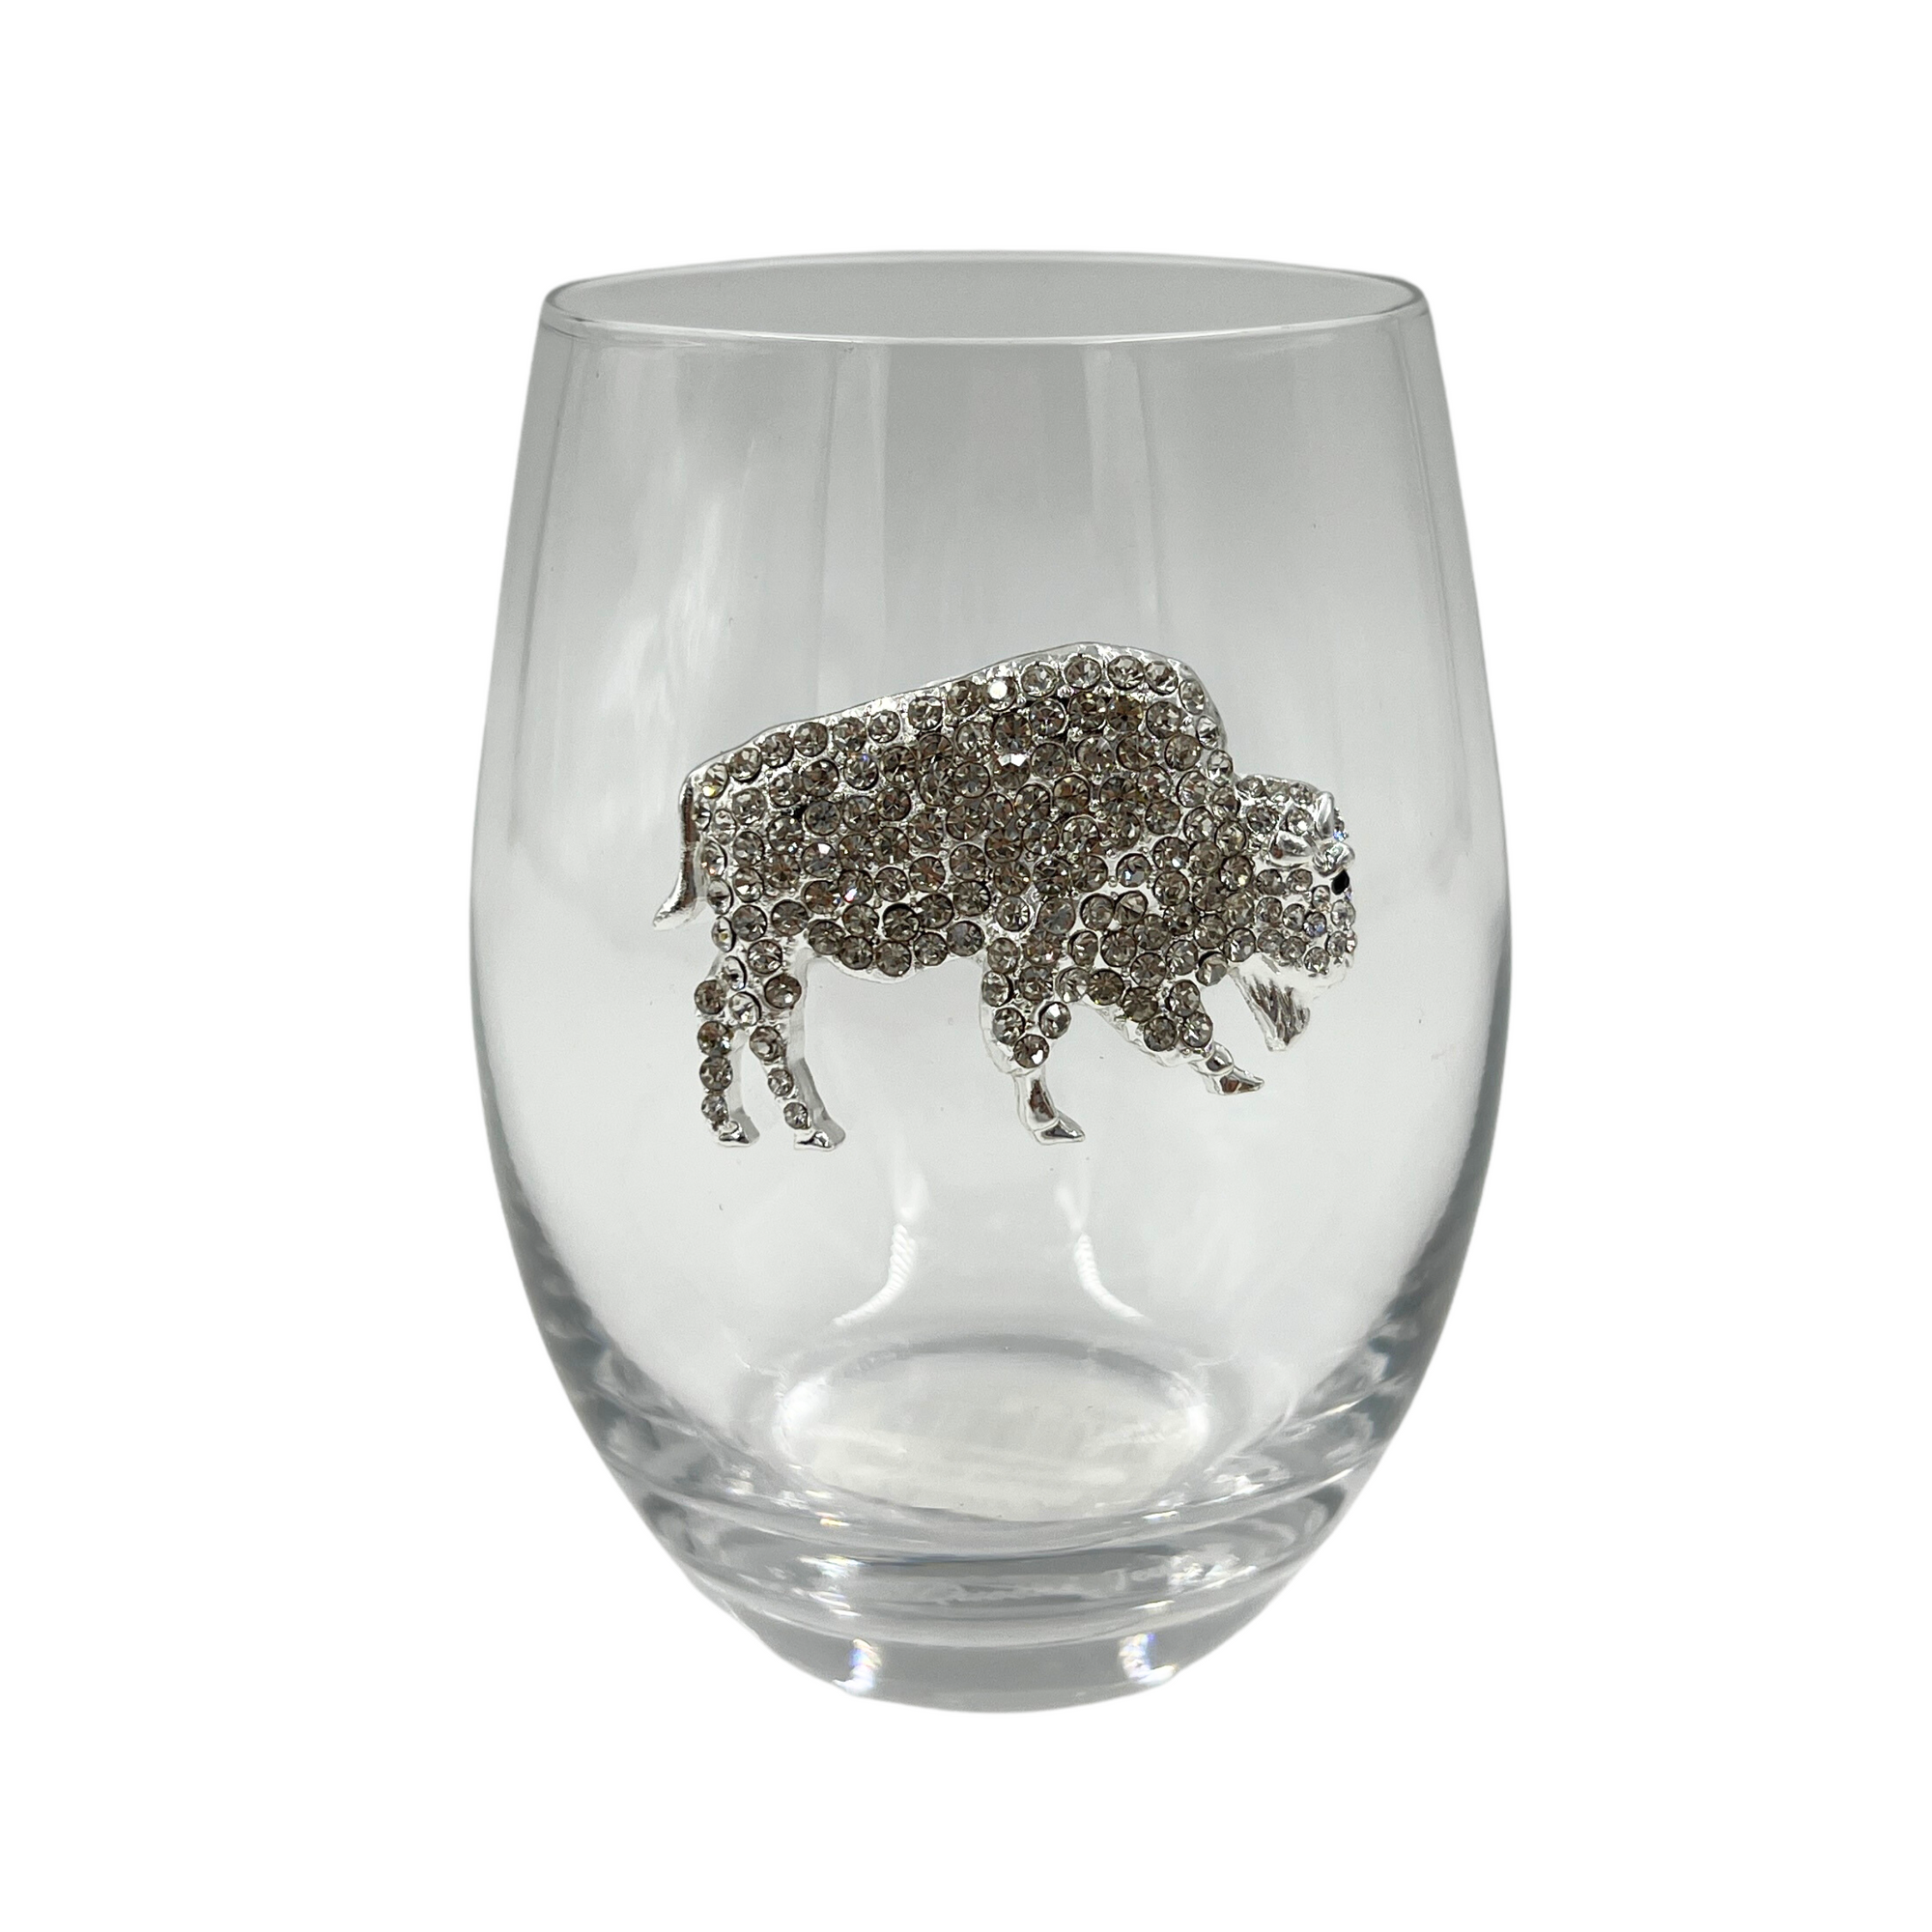 BFLO Silver Jeweled Handcrafted Stemless Wine Glass